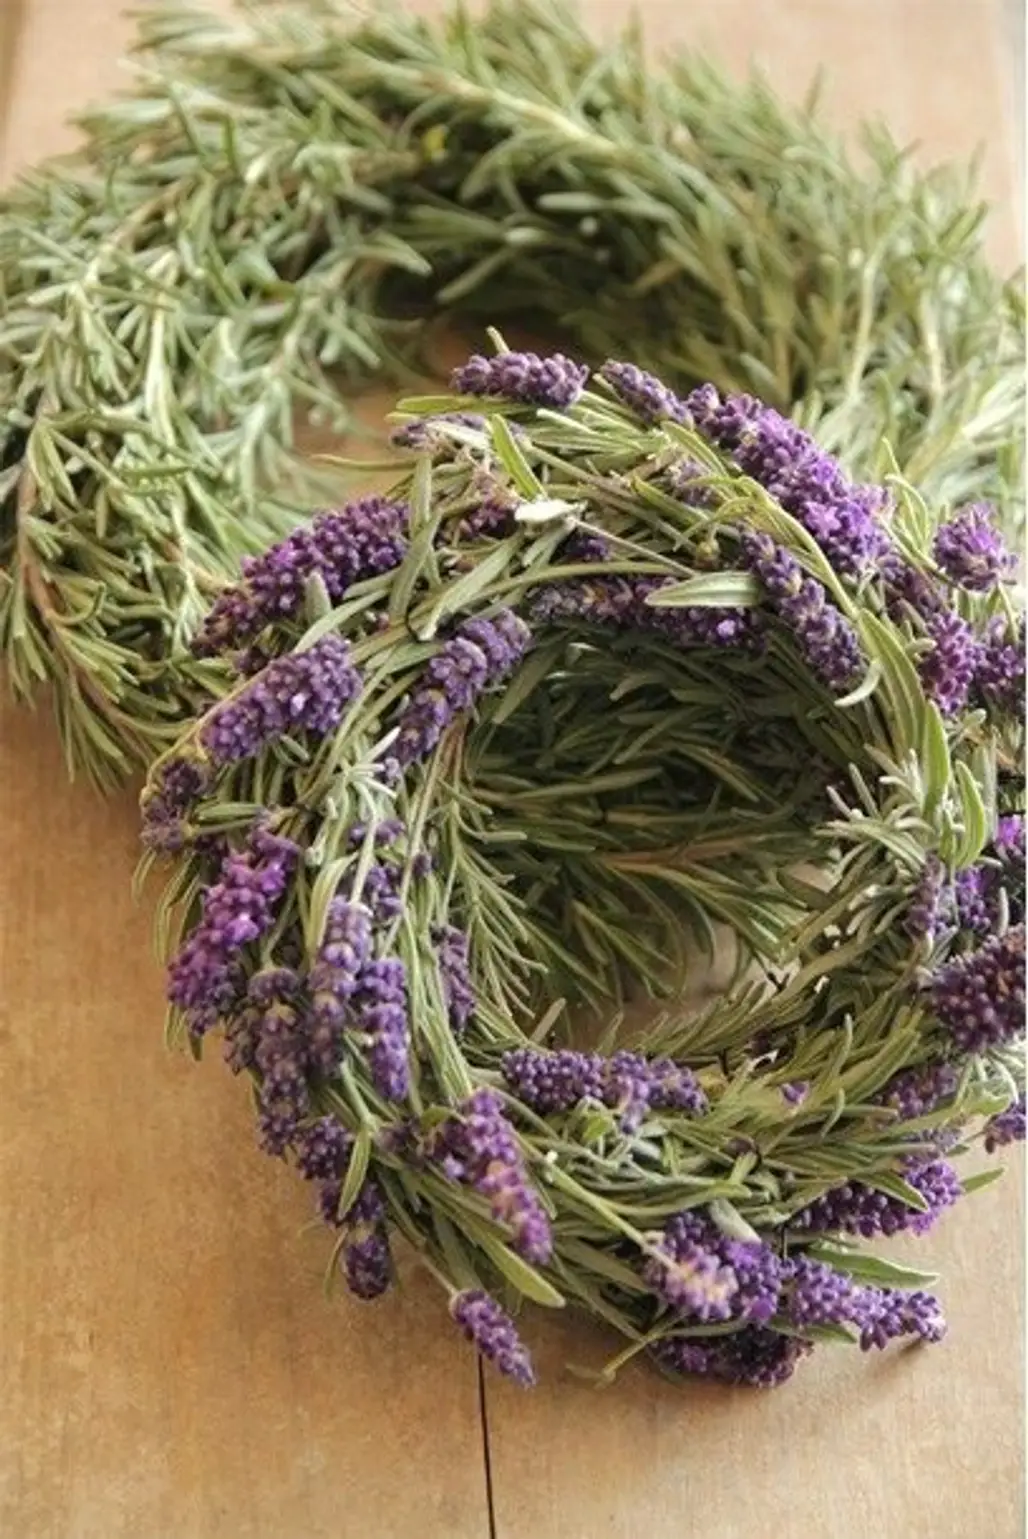 Combine the Powerful Scents of Fresh Rosemary and Lavender